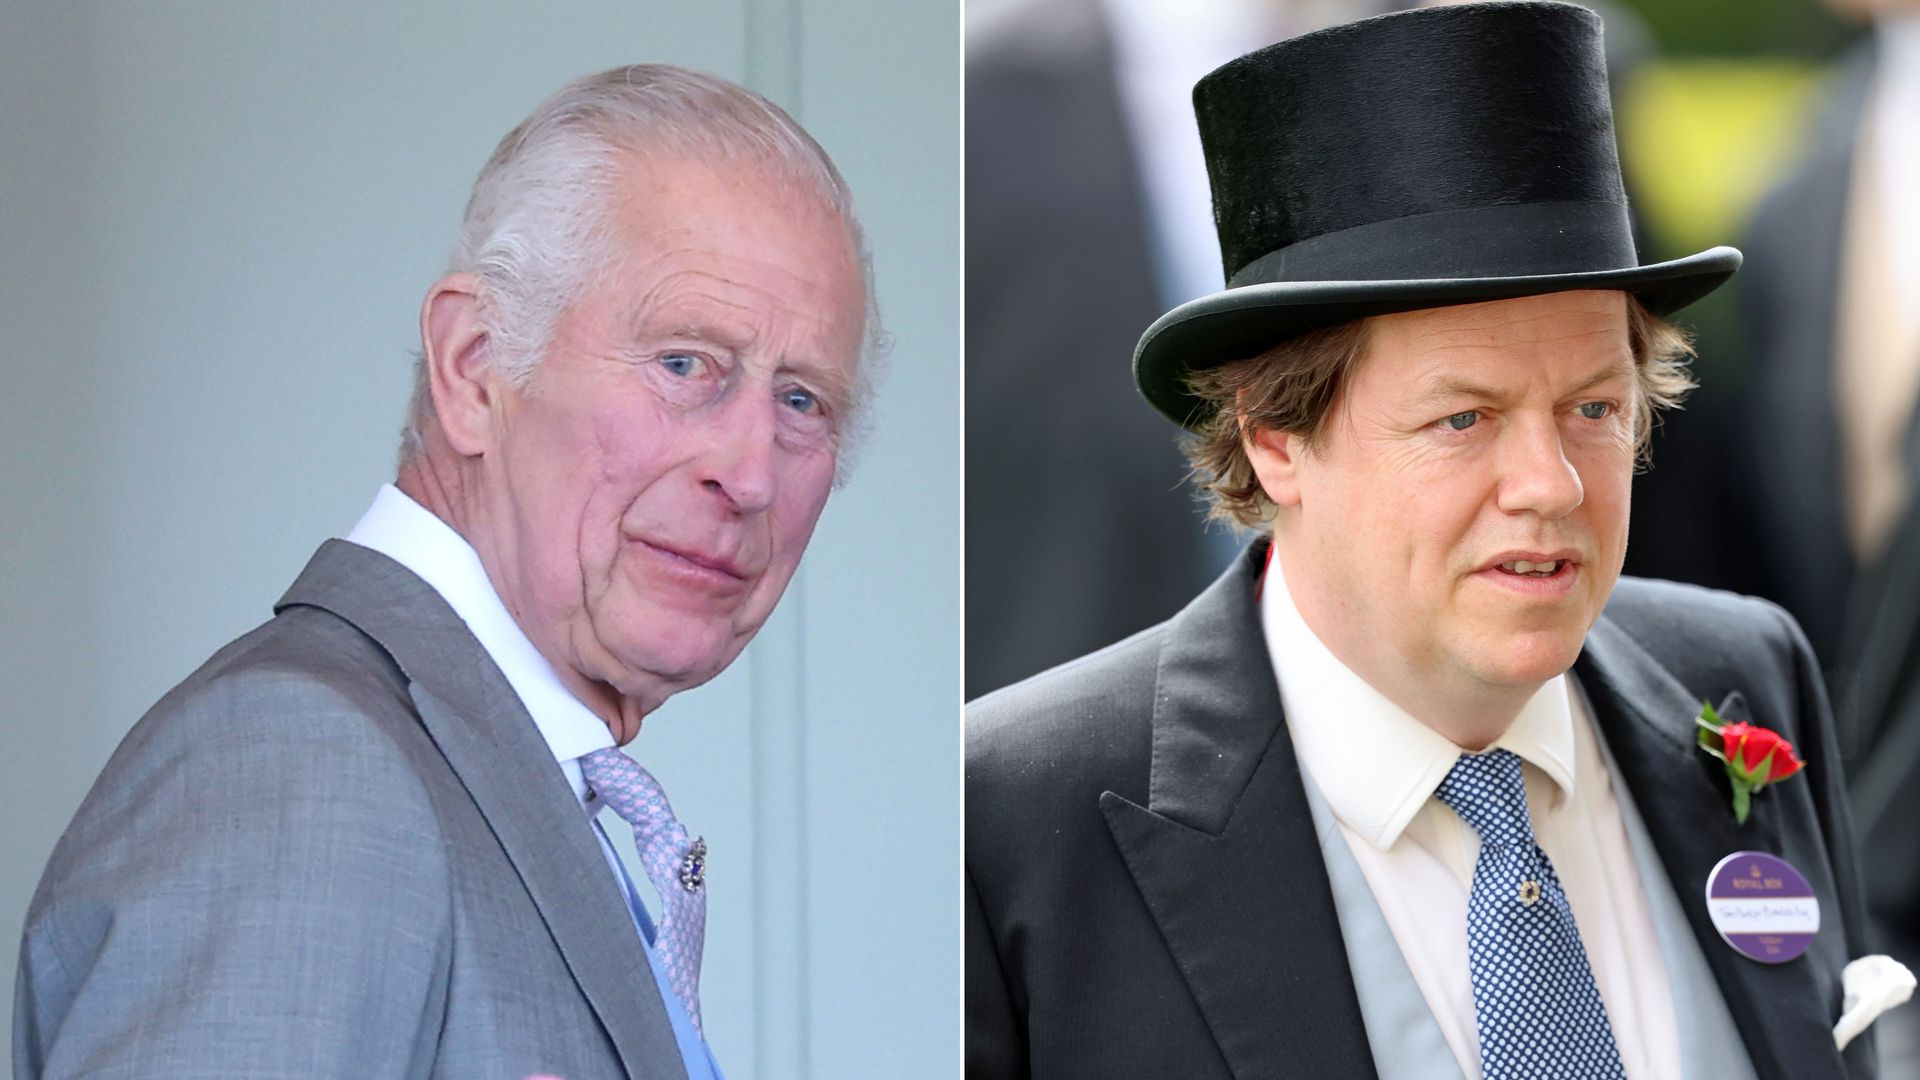 King Charles and Tom Parker-Bowles on Day 3 of Royal Ascot